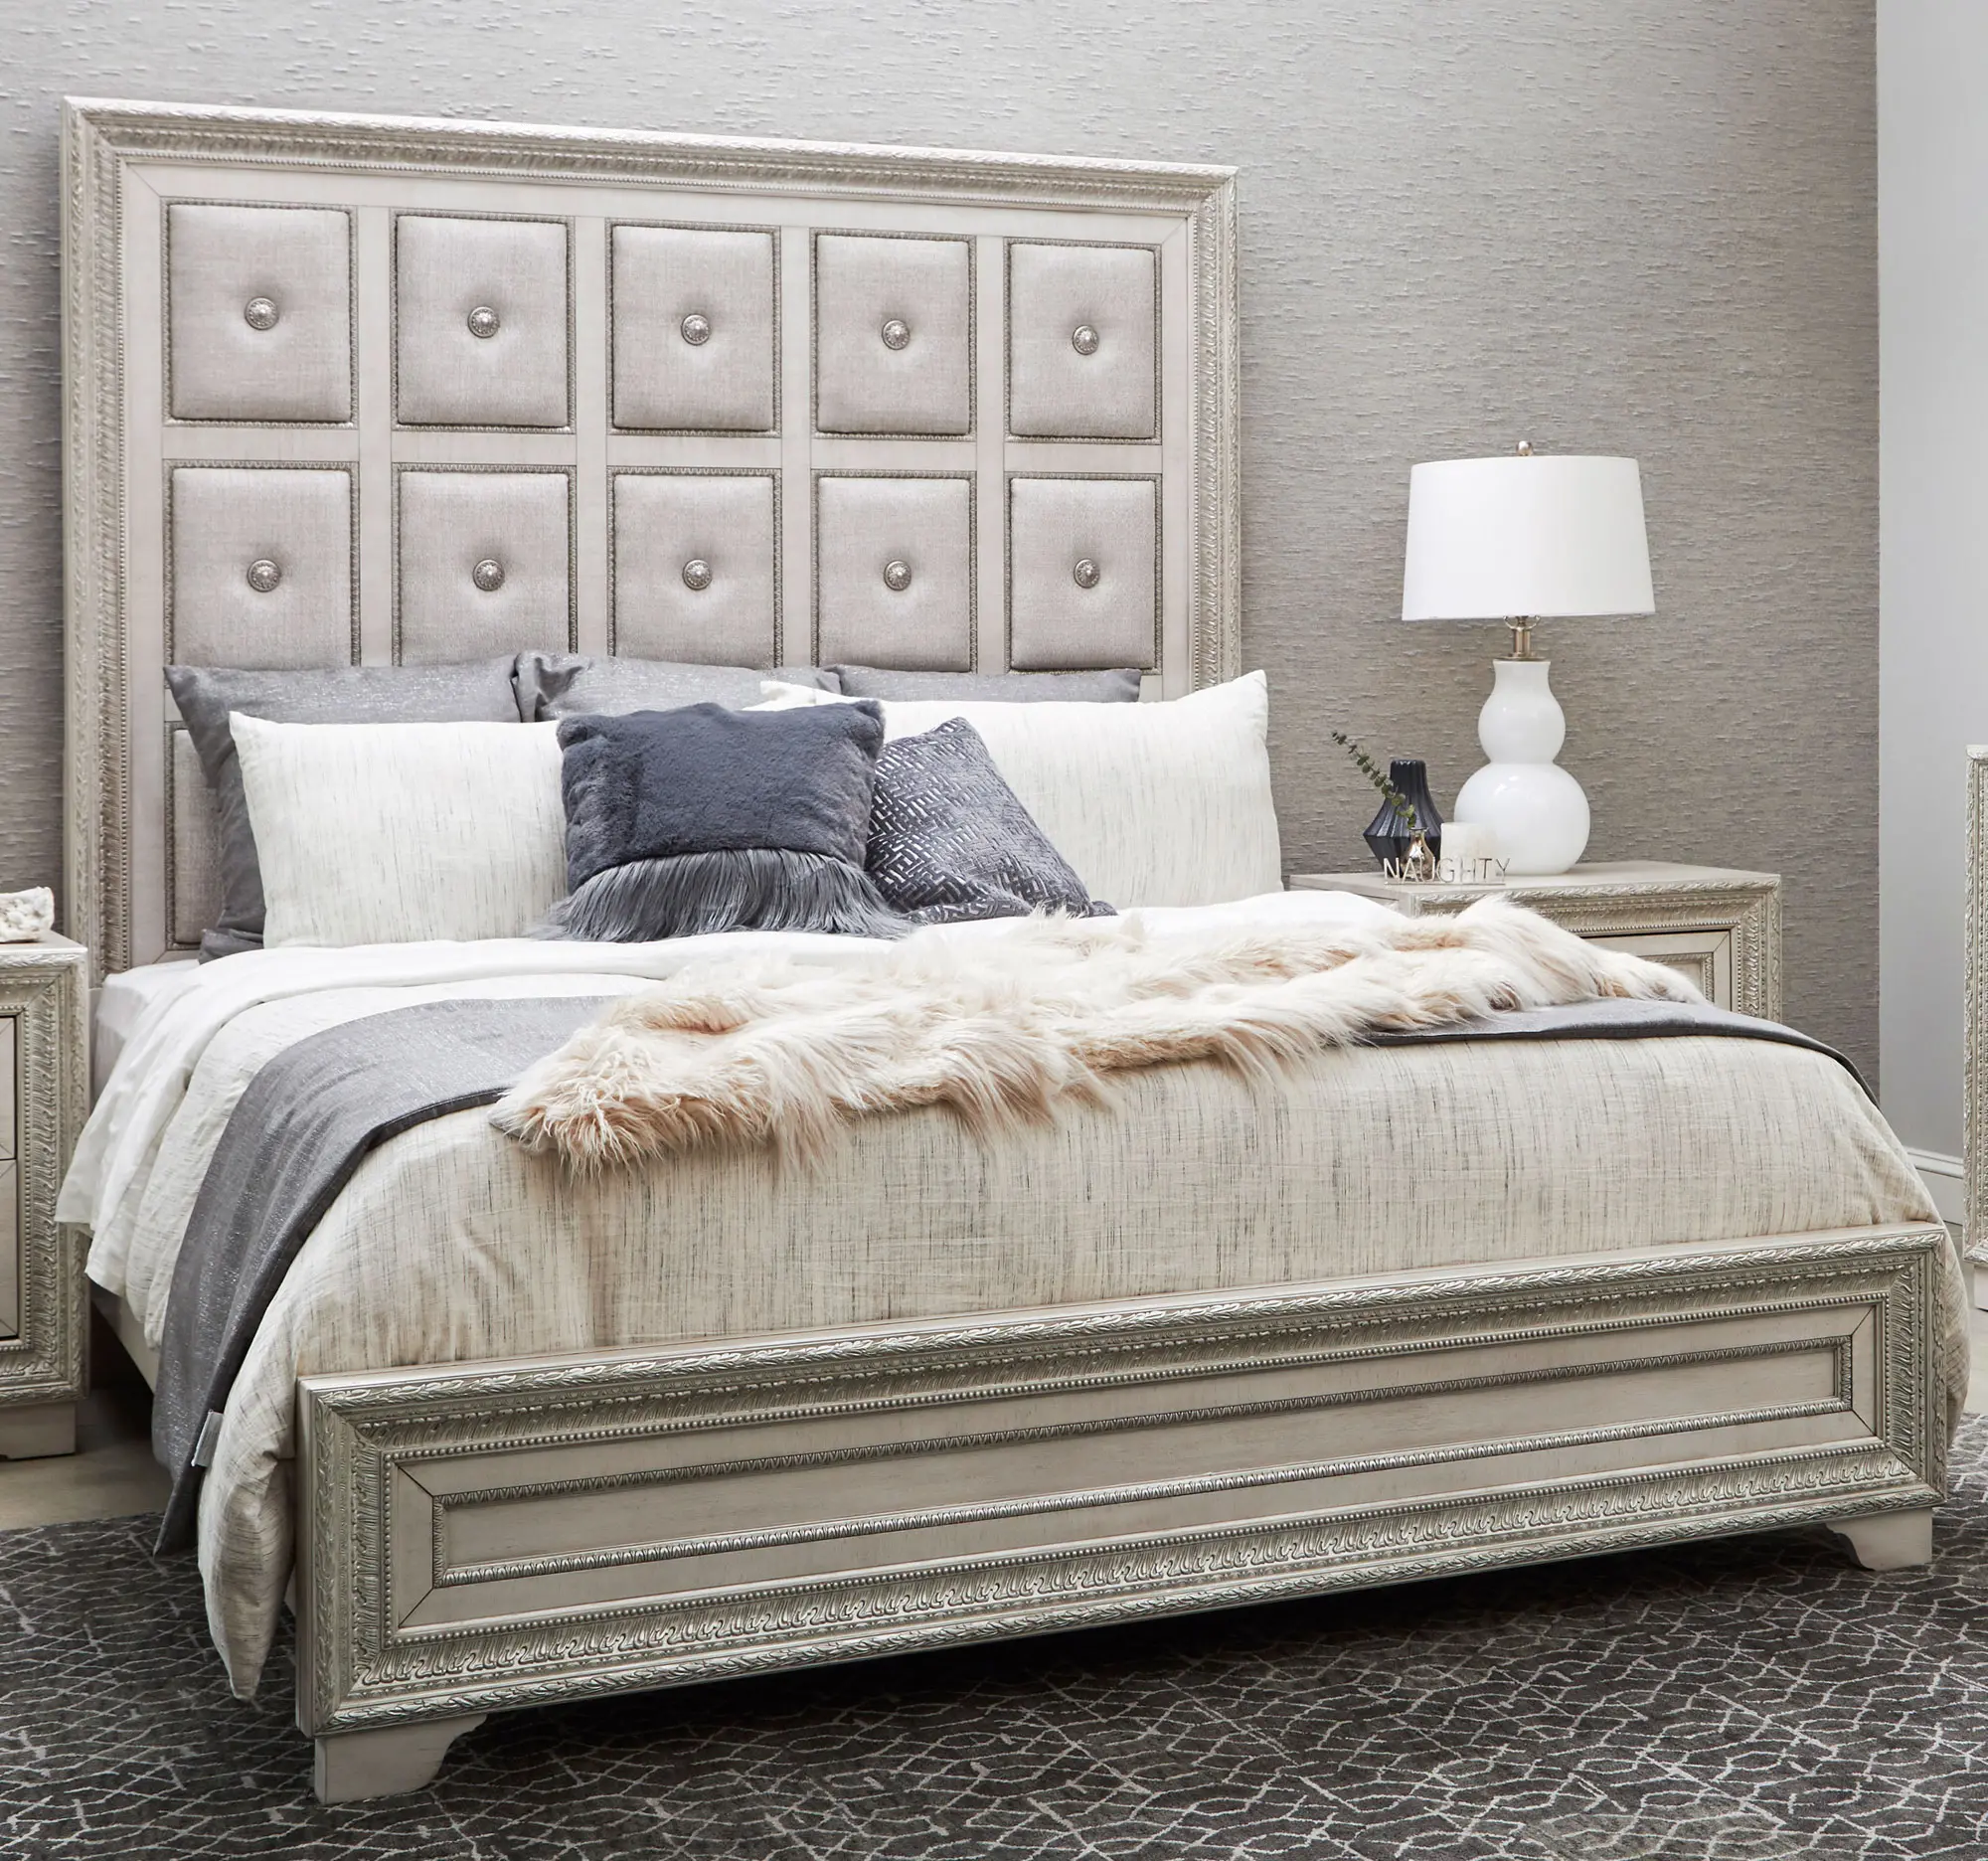 Camila Pearl White Queen Bed